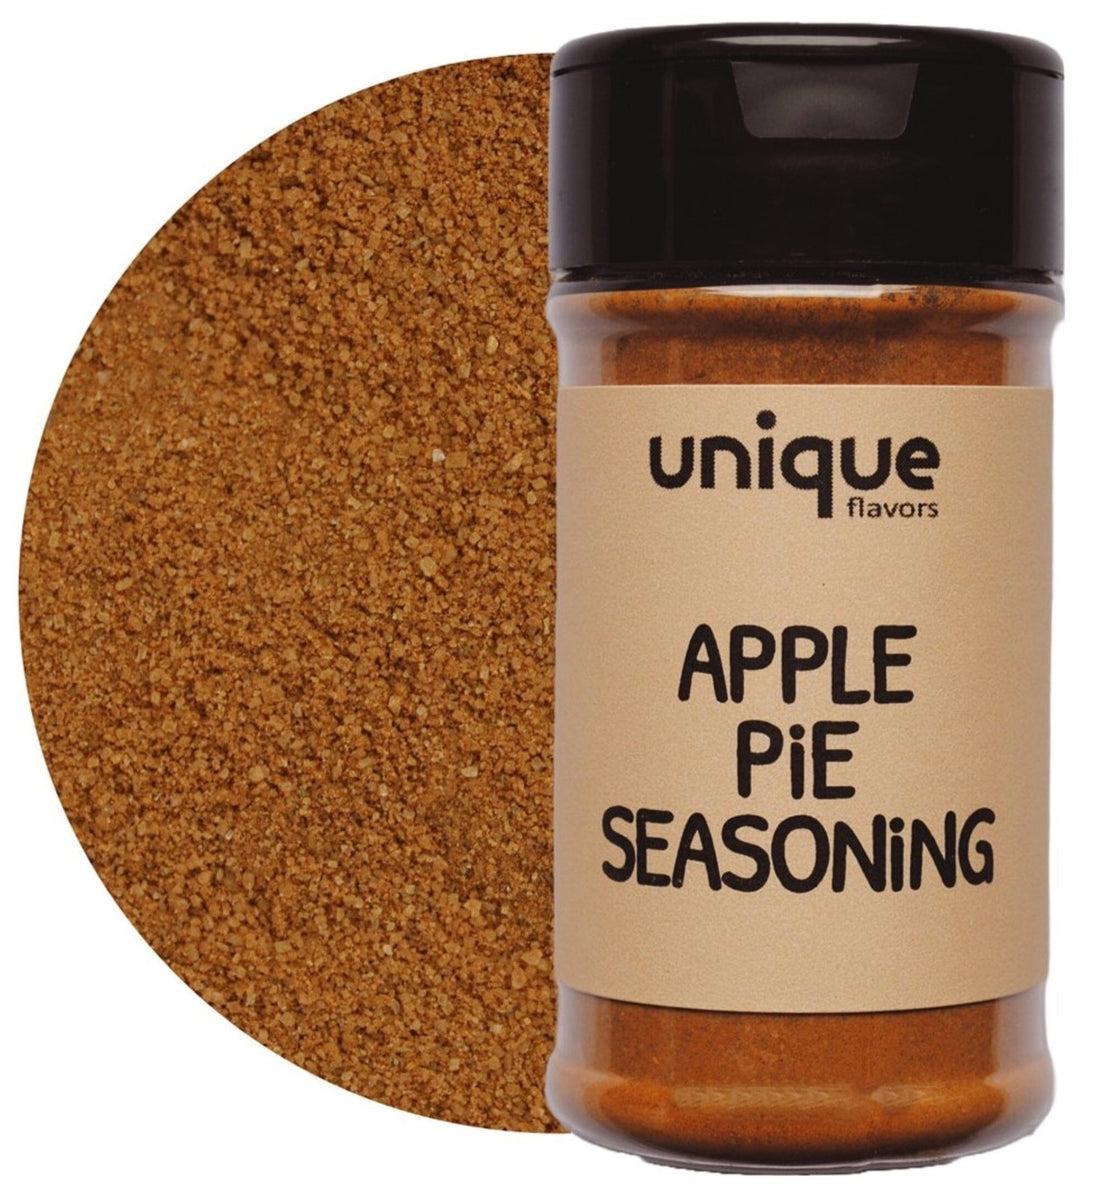 Apple Pie Seasoning Spice Mix: Enhance Your Apple Pie Cake with Delicious Flavors